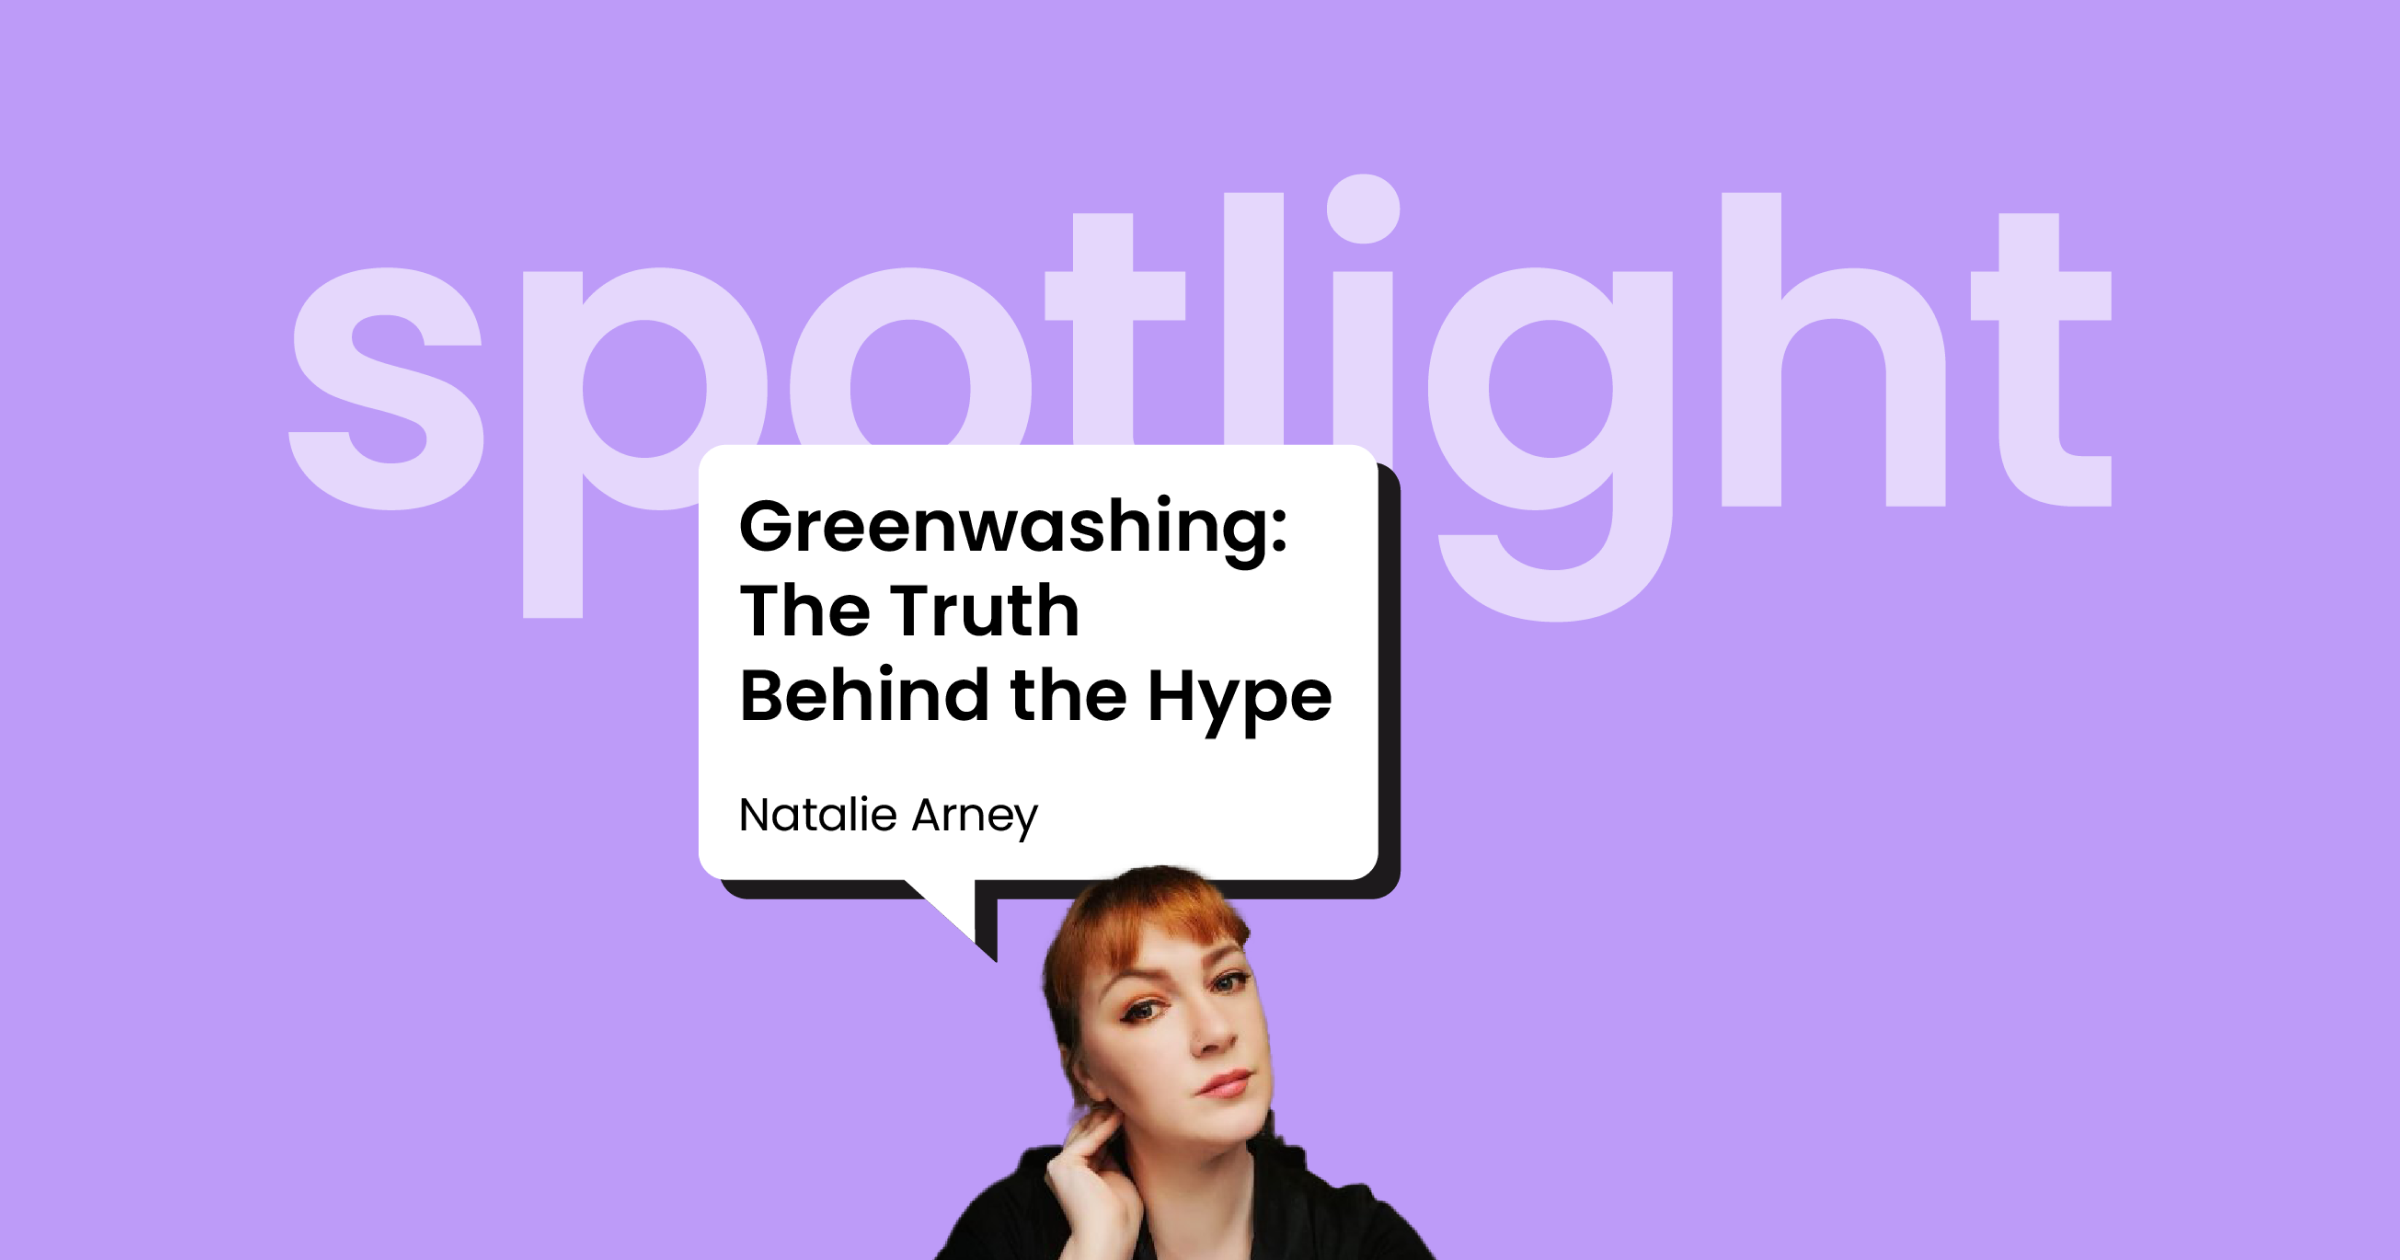 Greenwashing: The Truth Behind the Hype